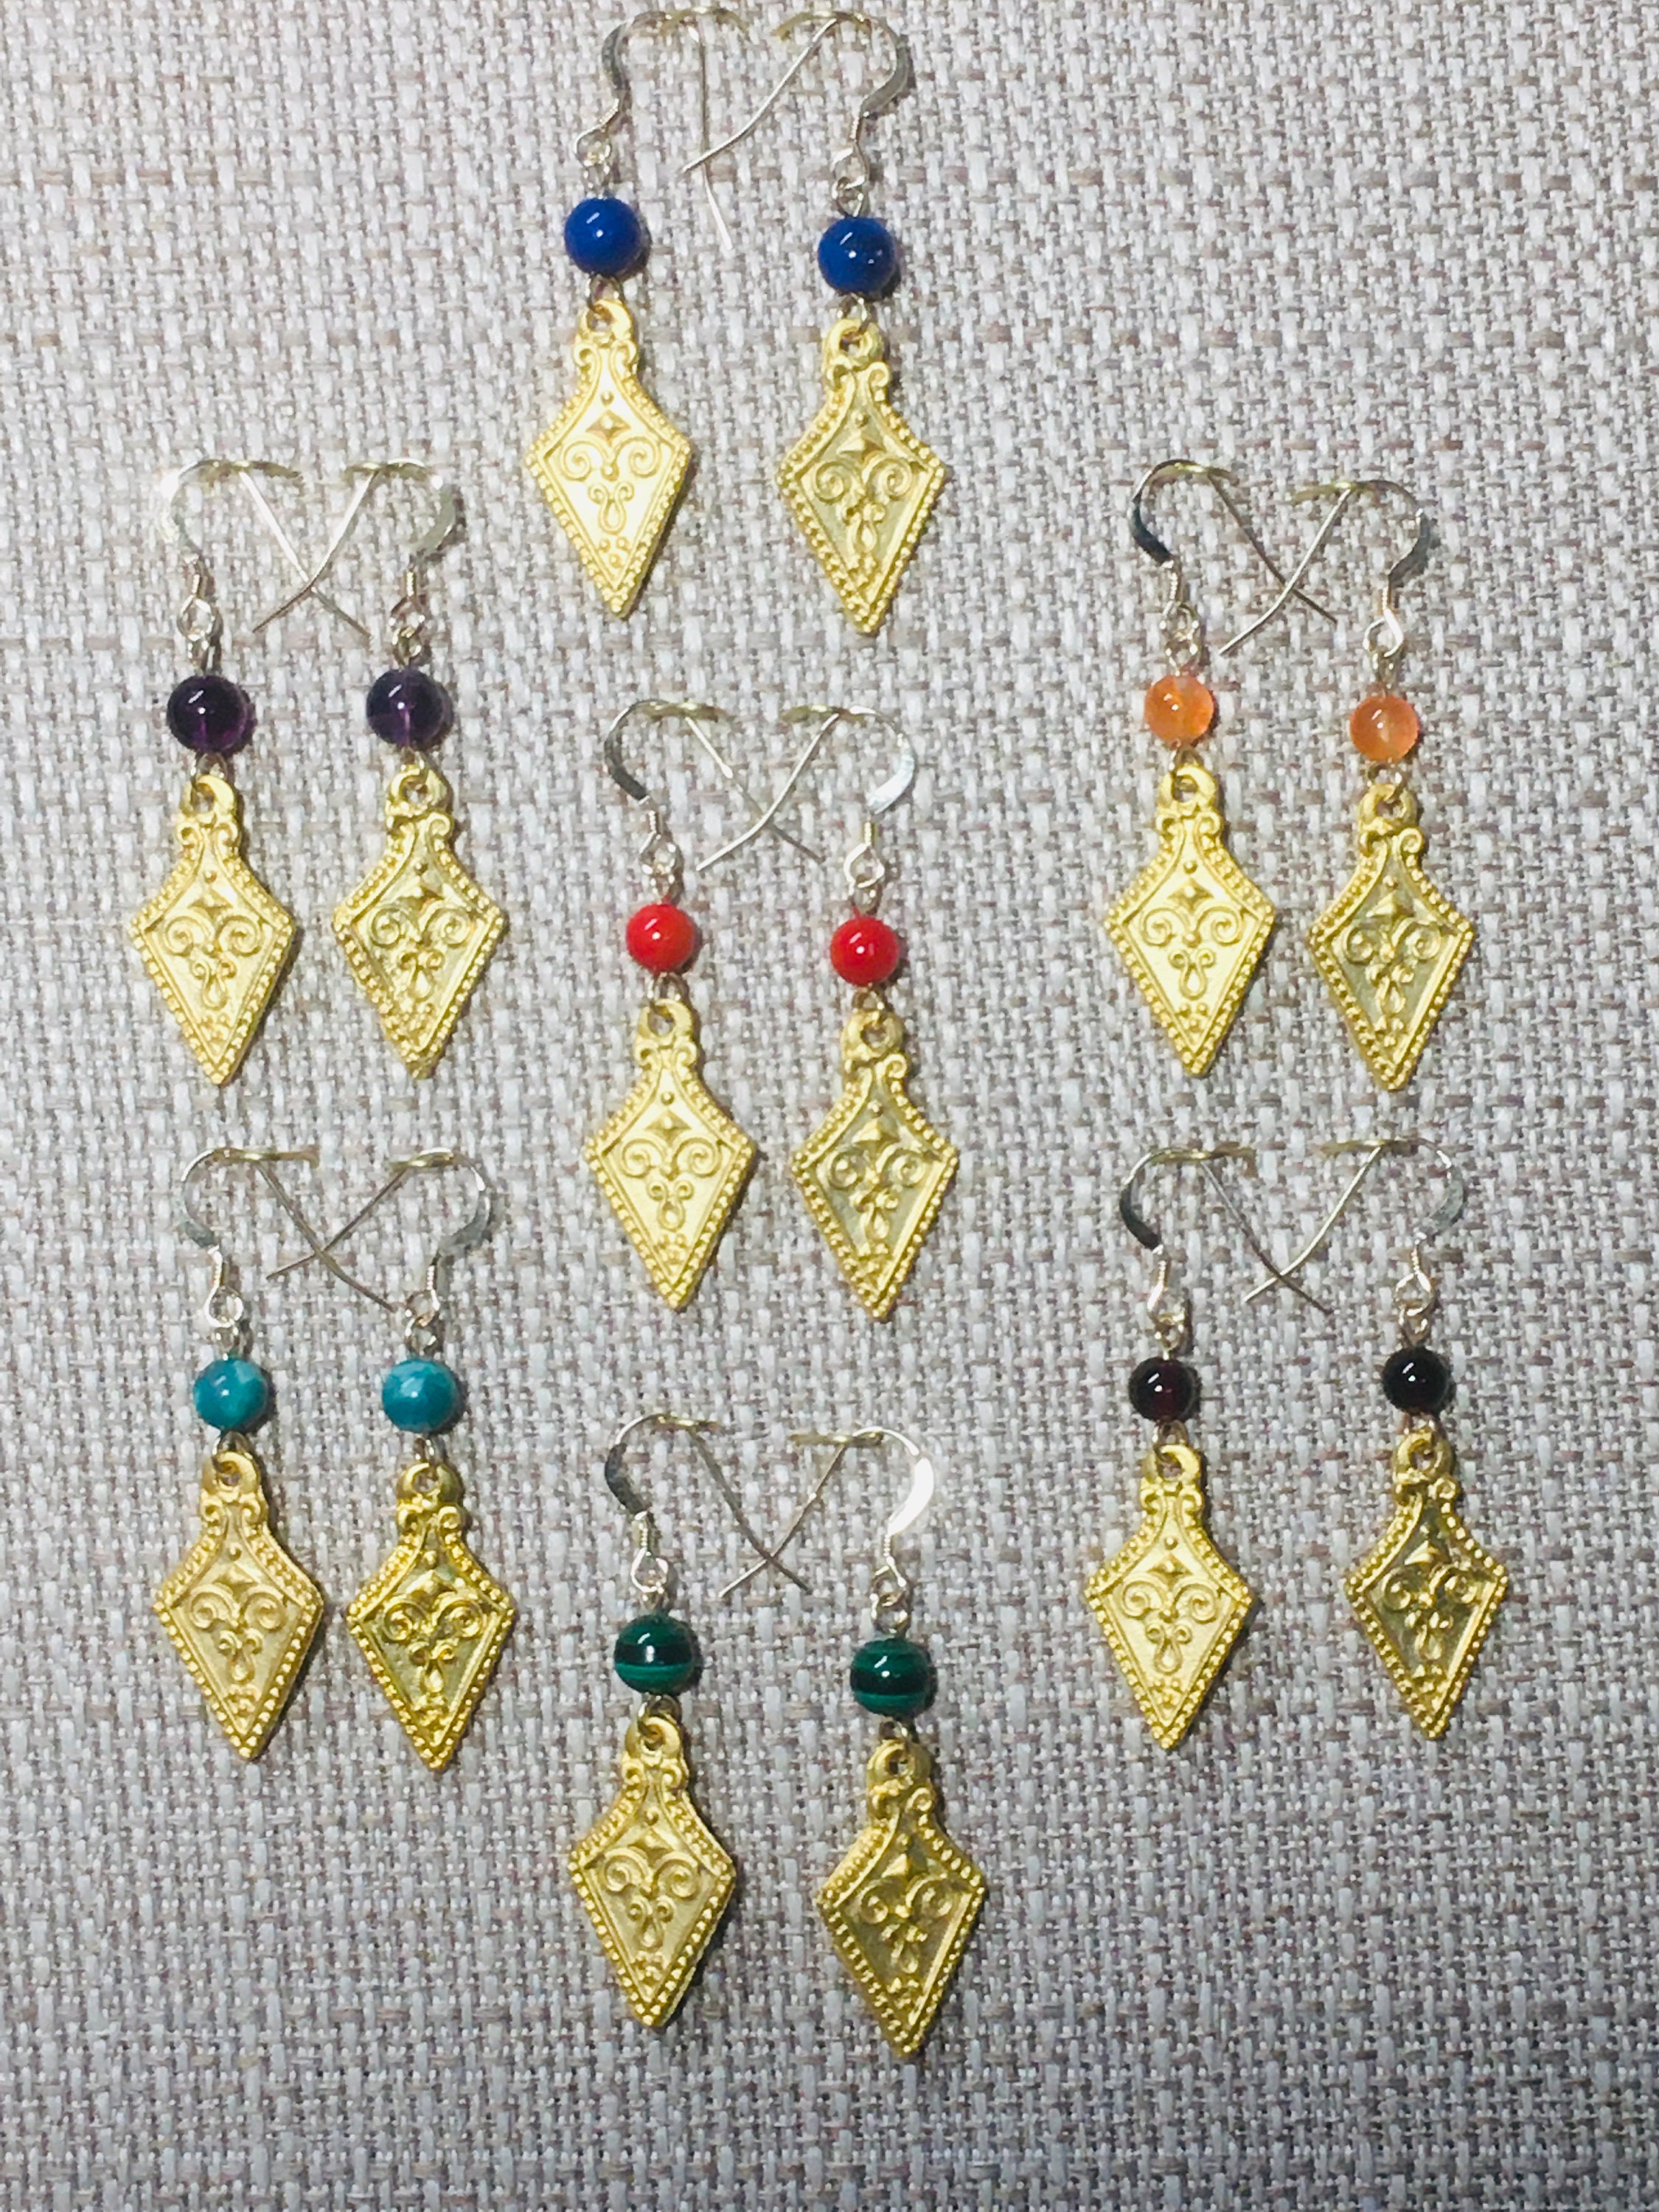 Bronze Age style 22k gold plate earrings with a choice of gemstone beads